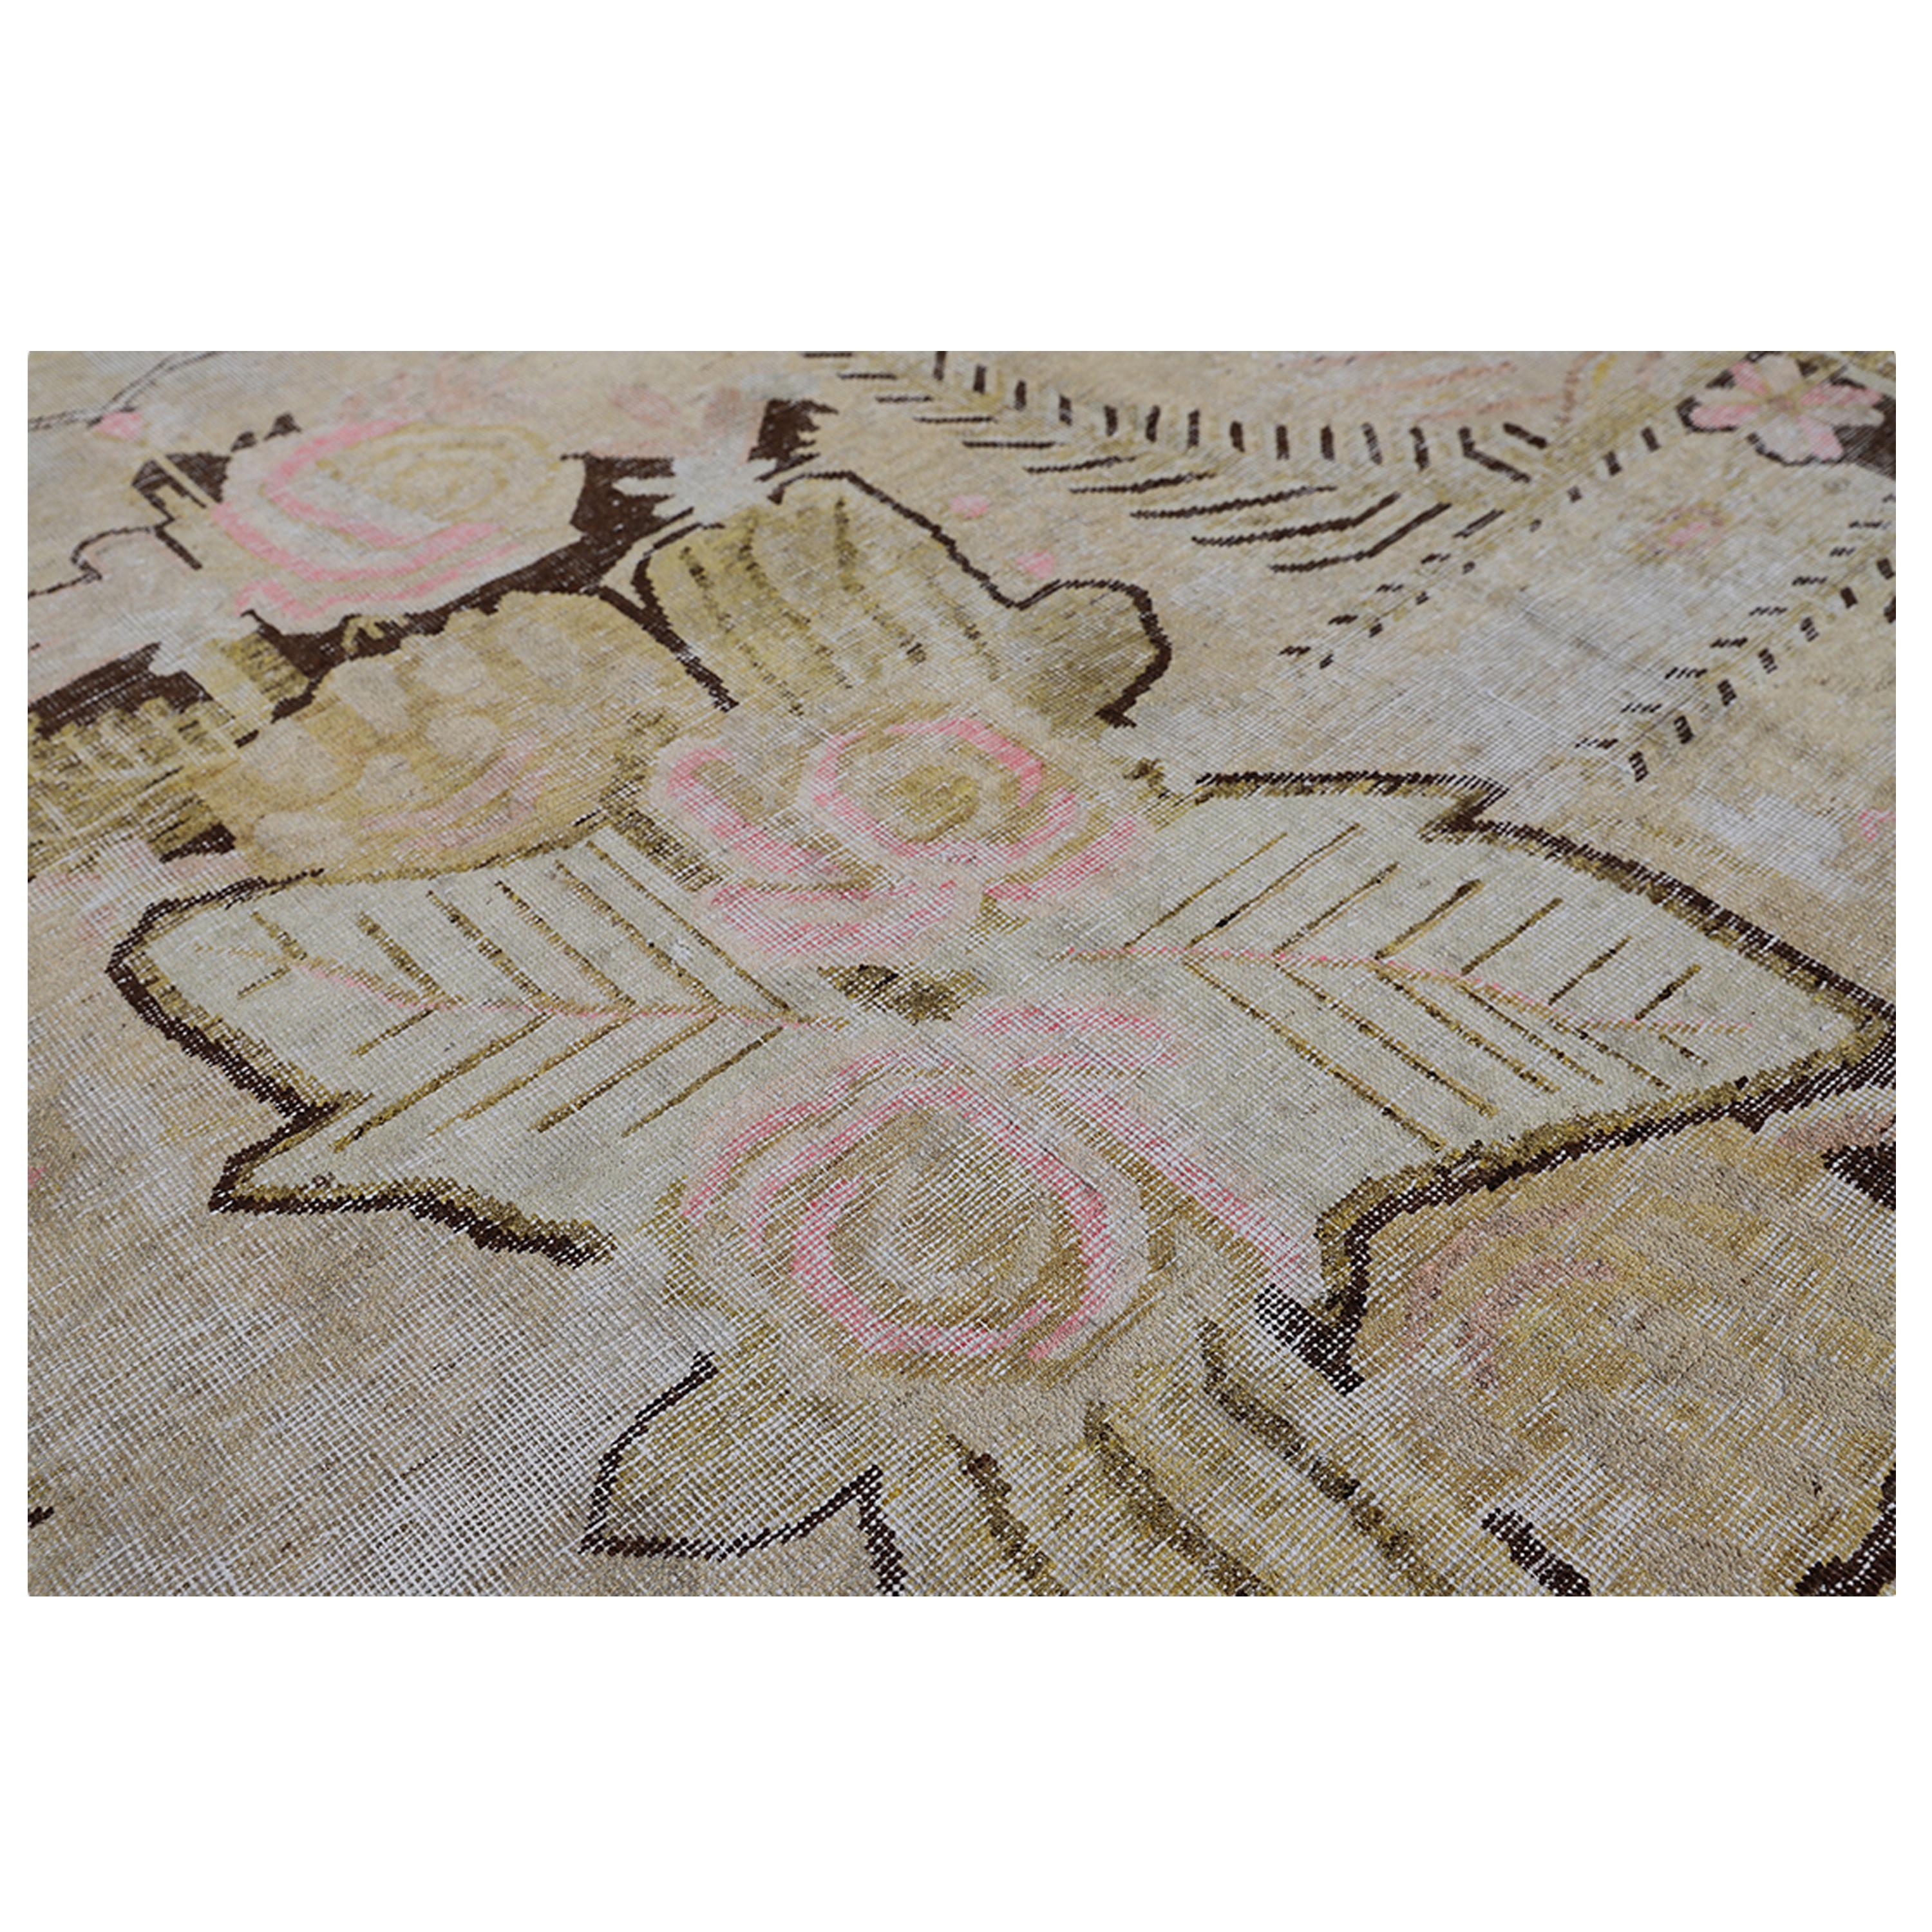 Sourced from the ancient Silk Road to bring a genuine one-of-a-kind rug to your home, this Multicolored Vintage Wool Cotton Blend Rug - 5'6